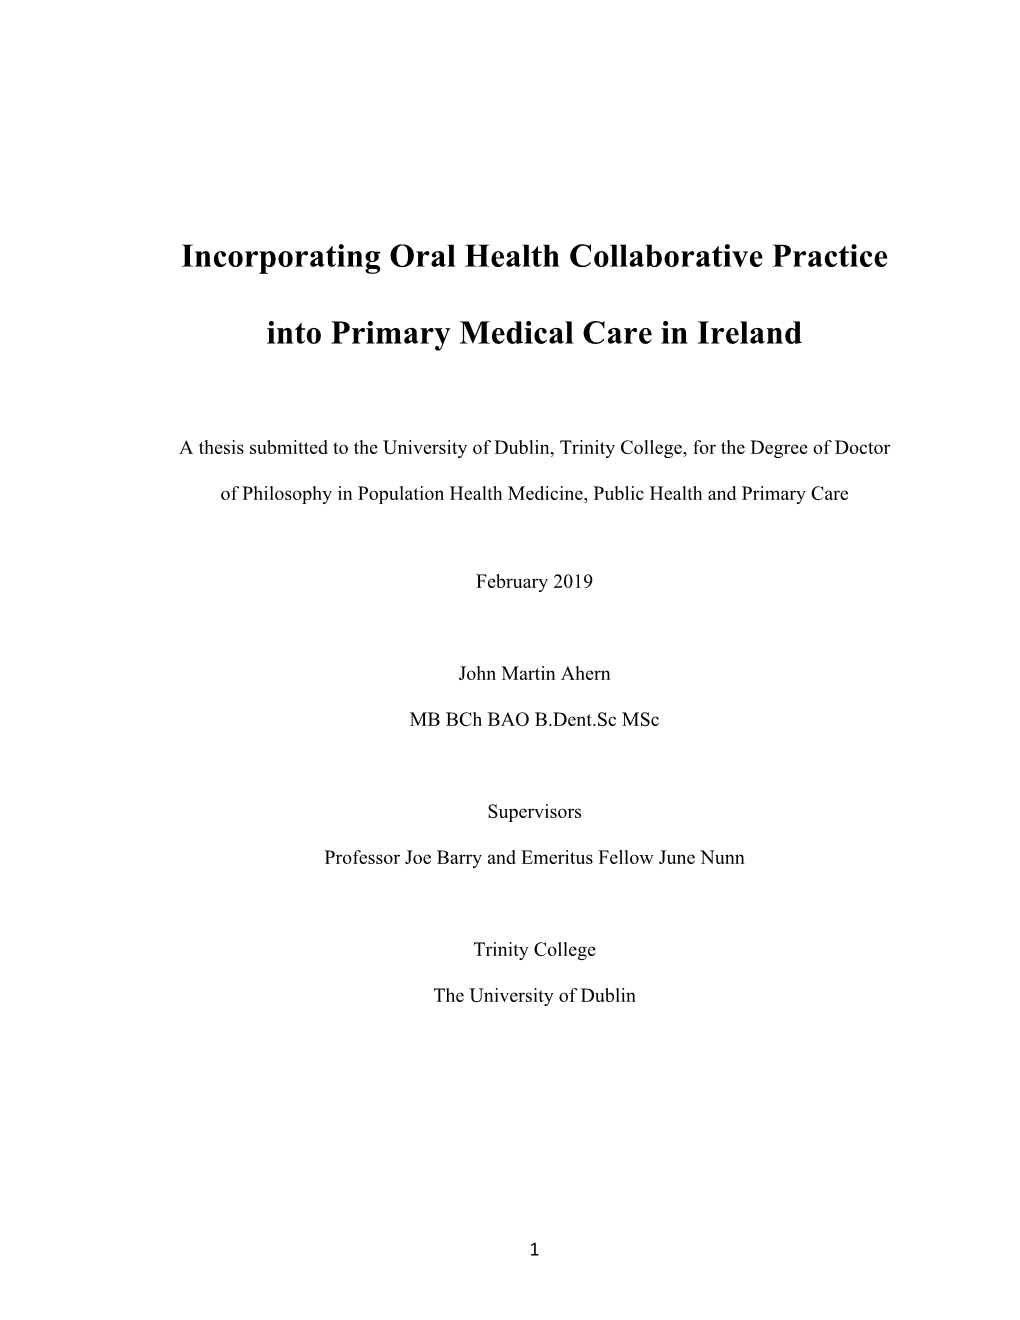 Incorporating Oral Health Collaborative Practice Into Primary Medical Care in Ireland